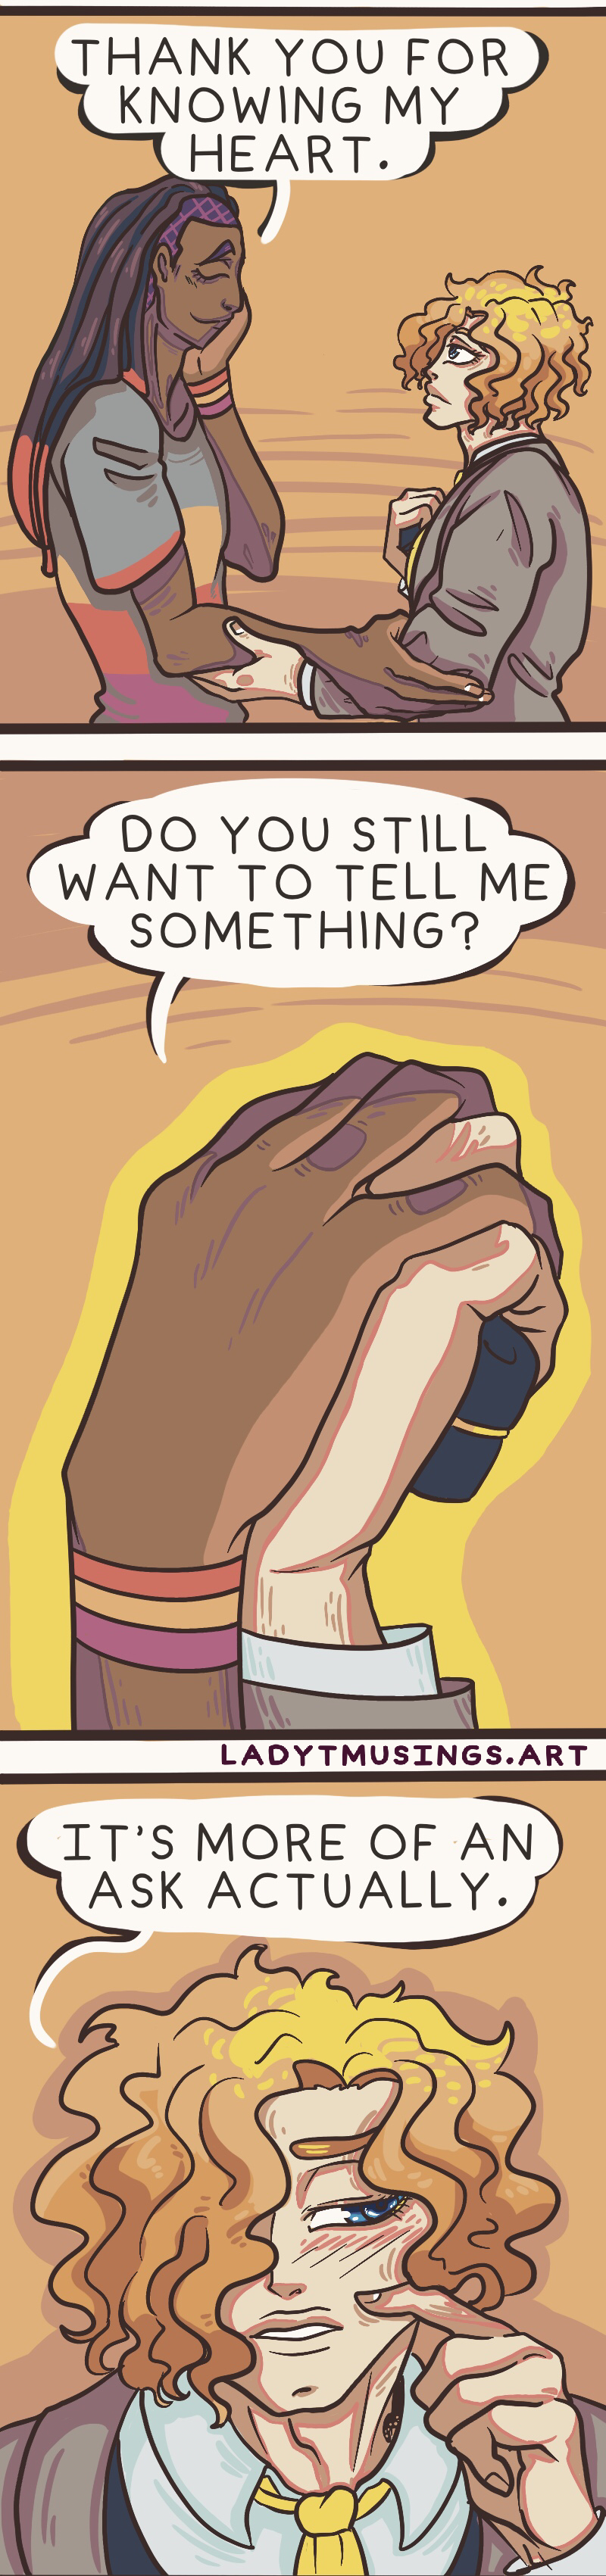 3 panels of jamal and dylan talking 2nd is close up of jamal's hand over dylan's clutching the wedding ring box